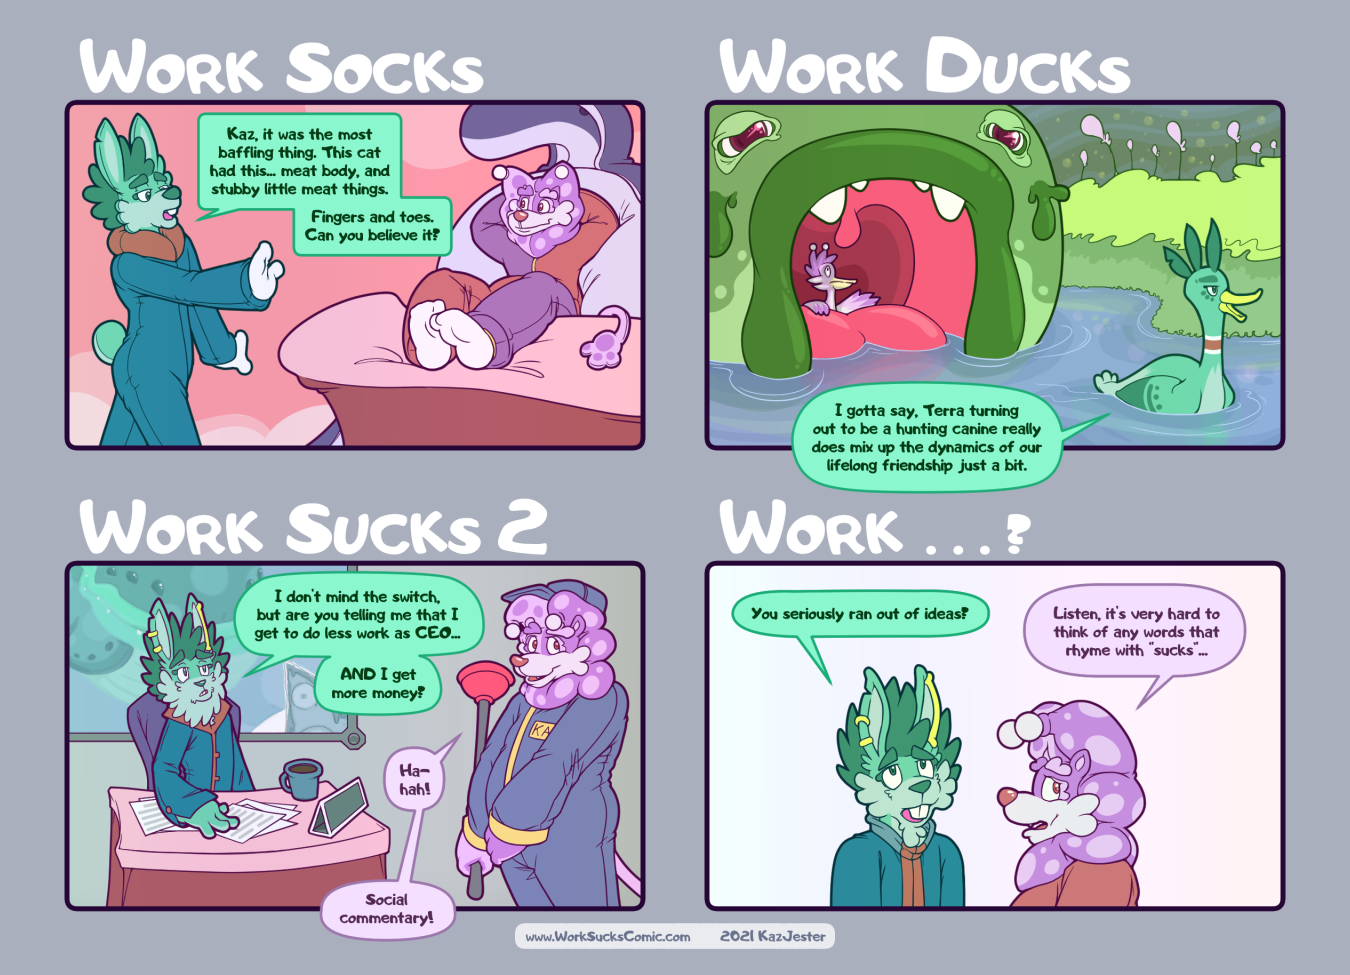 Work Sucks - So Does the Food Chain!